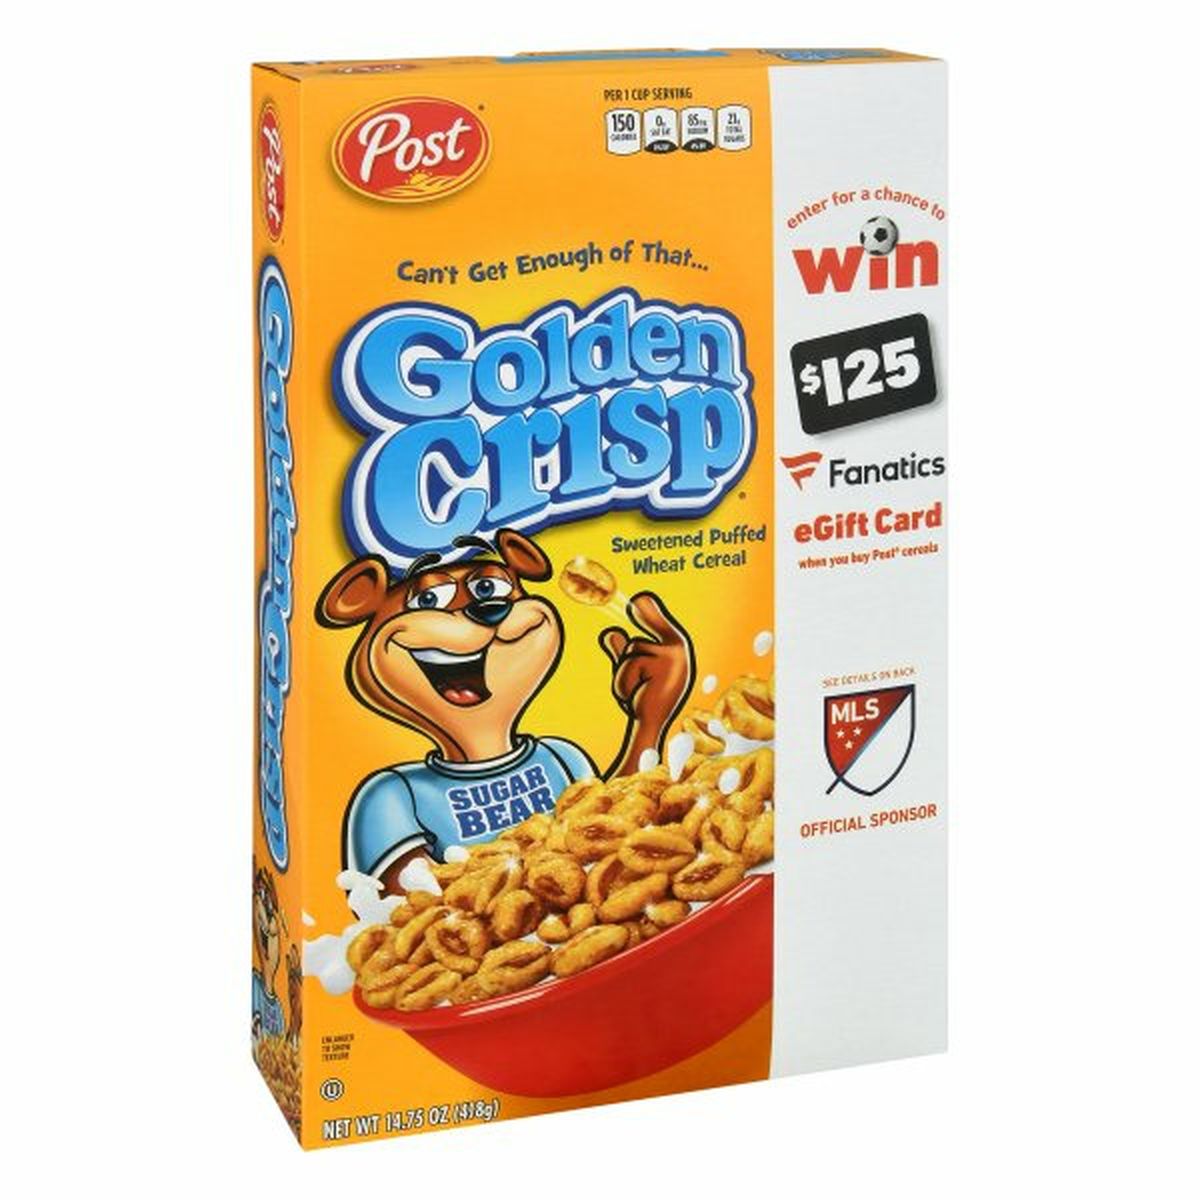 Calories in Post Cereal, Sweetened Puffed Wheat